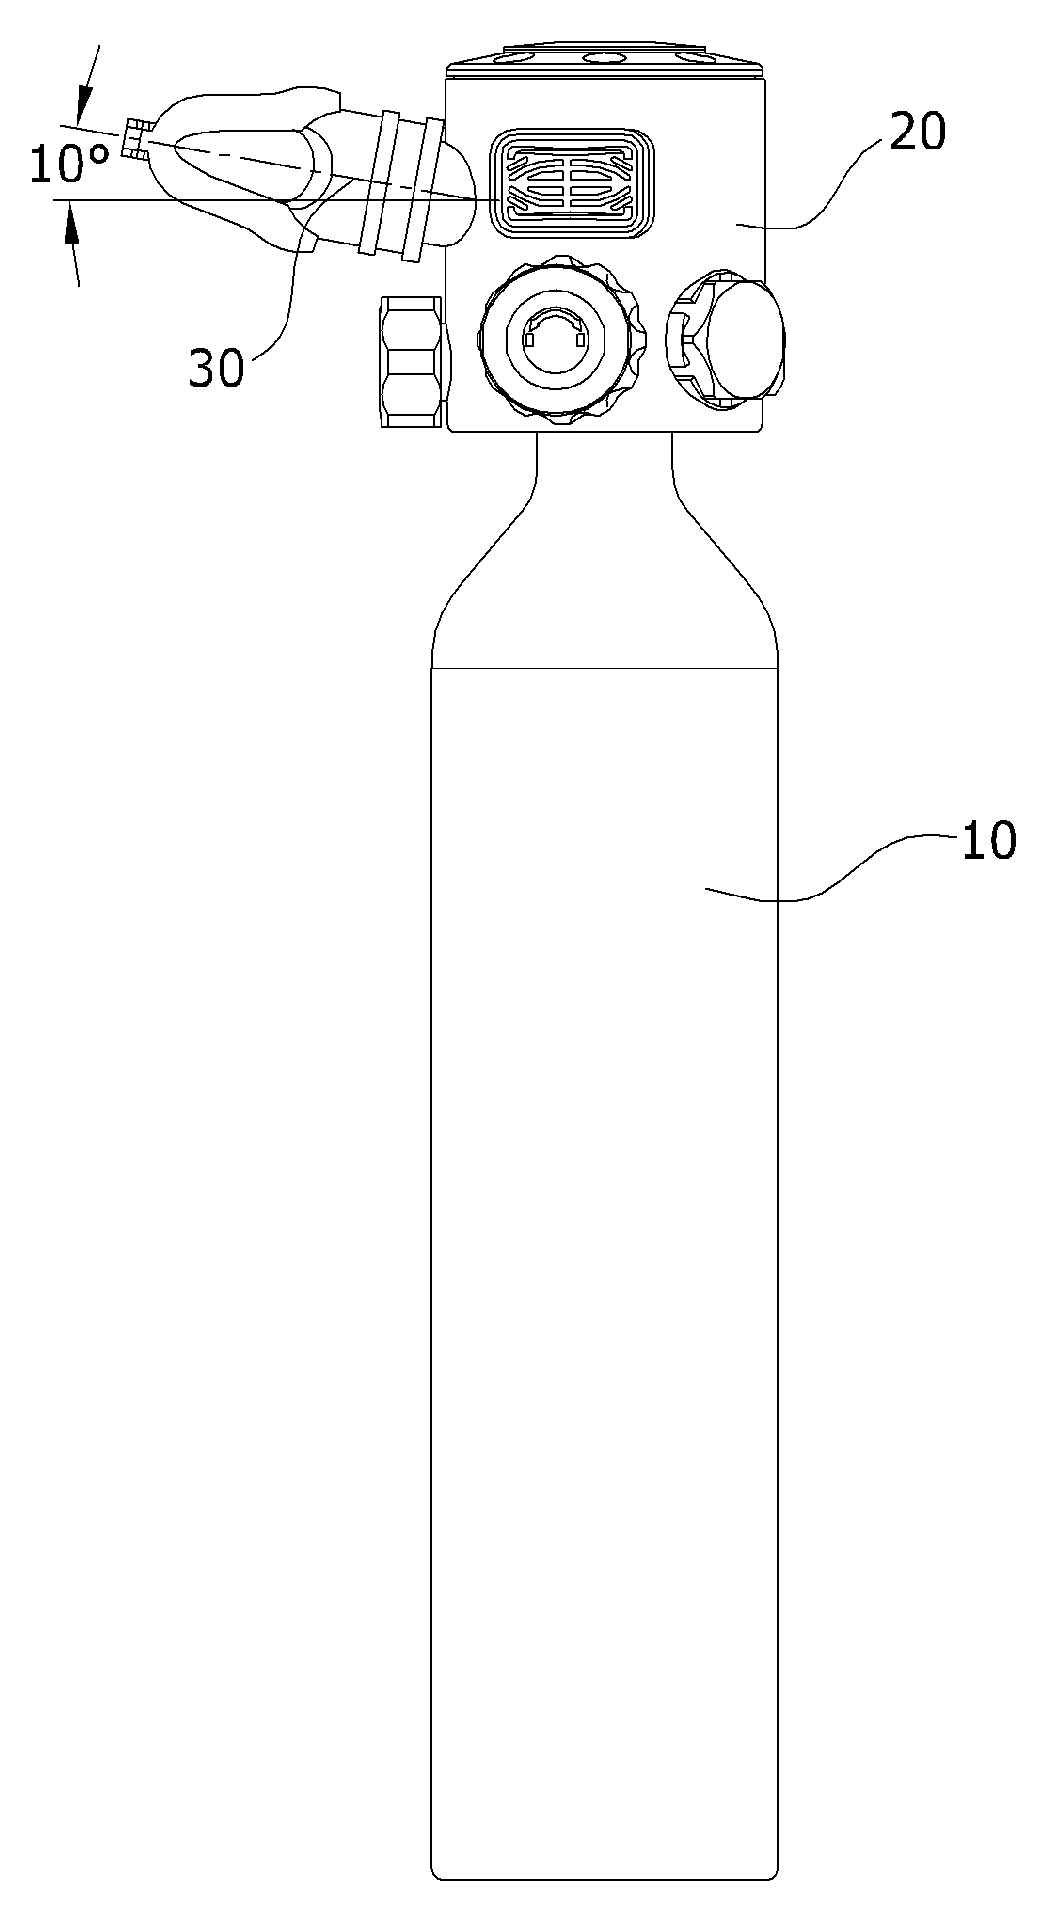 Breathing apparatus structure with two-stage reduced-pressure spare air bottle head